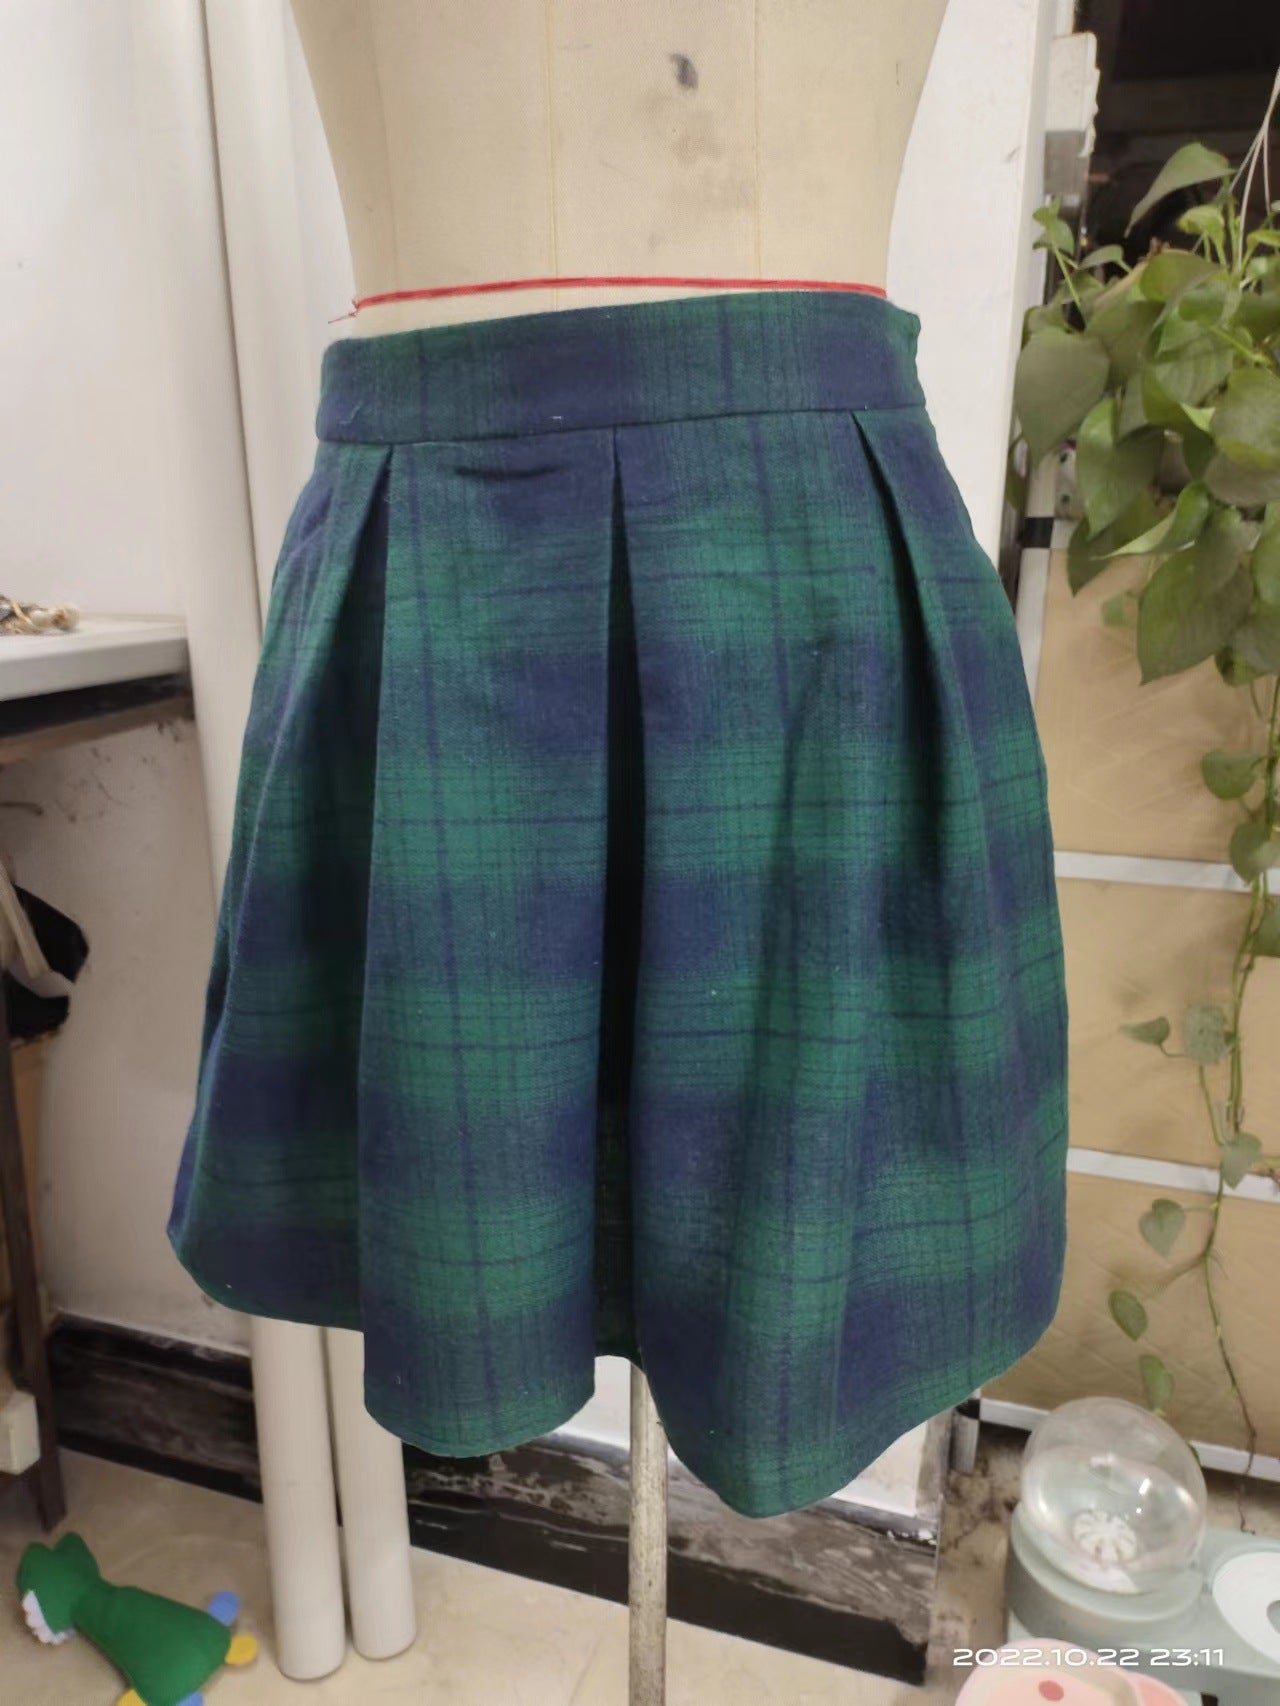 Women's Attractive Classic Patchwork Plaid Pleated Skirts